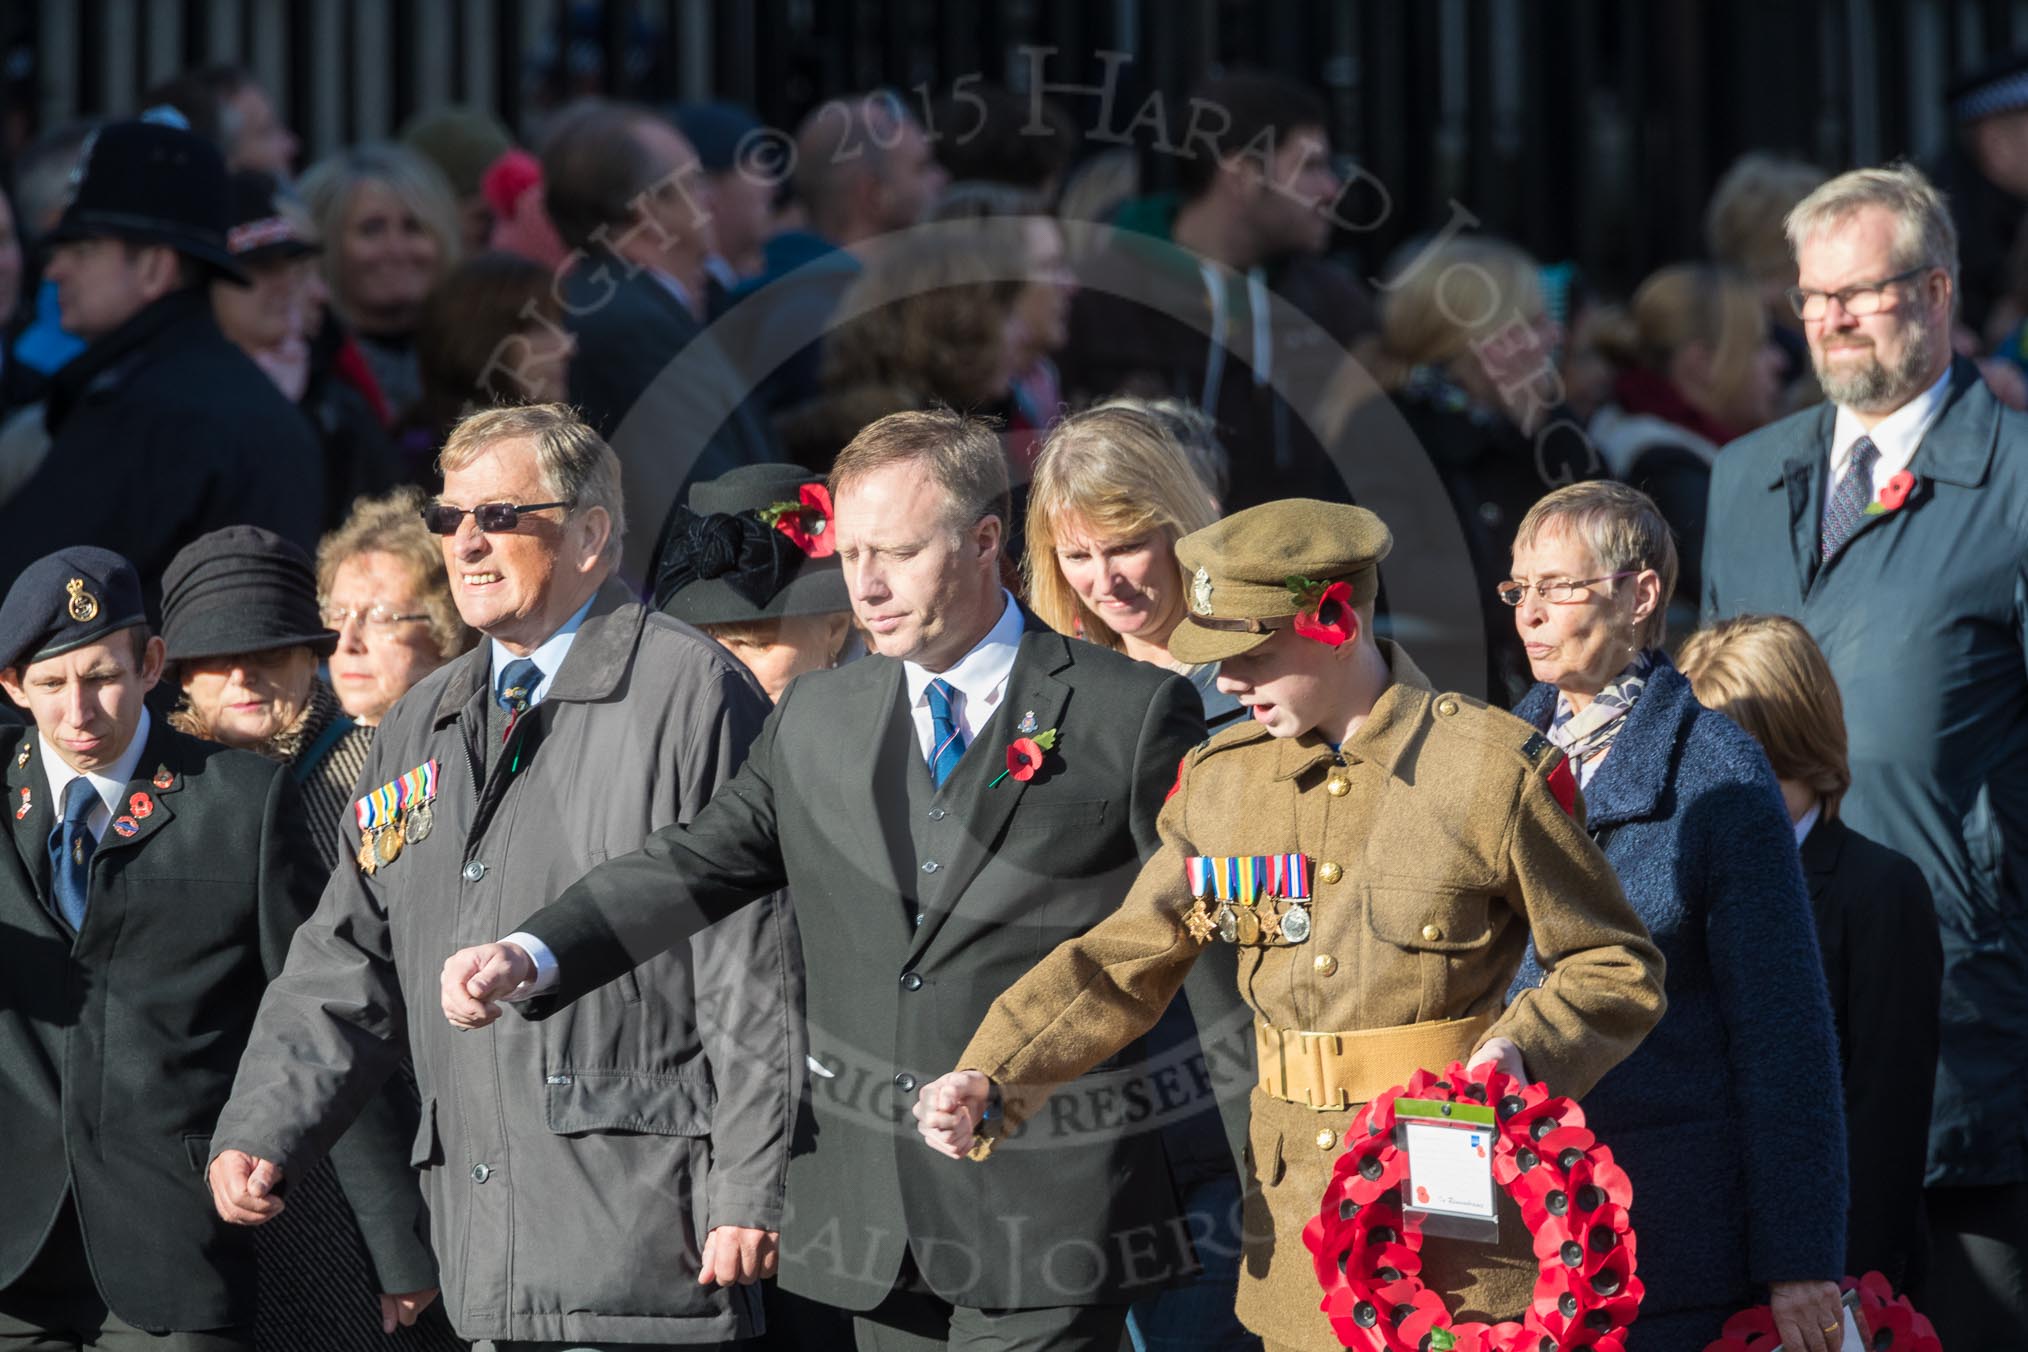 March Past, Remembrance Sunday at the Cenotaph 2016: M22 The Royal British Legion - Civilians.
Cenotaph, Whitehall, London SW1,
London,
Greater London,
United Kingdom,
on 13 November 2016 at 13:16, image #2672